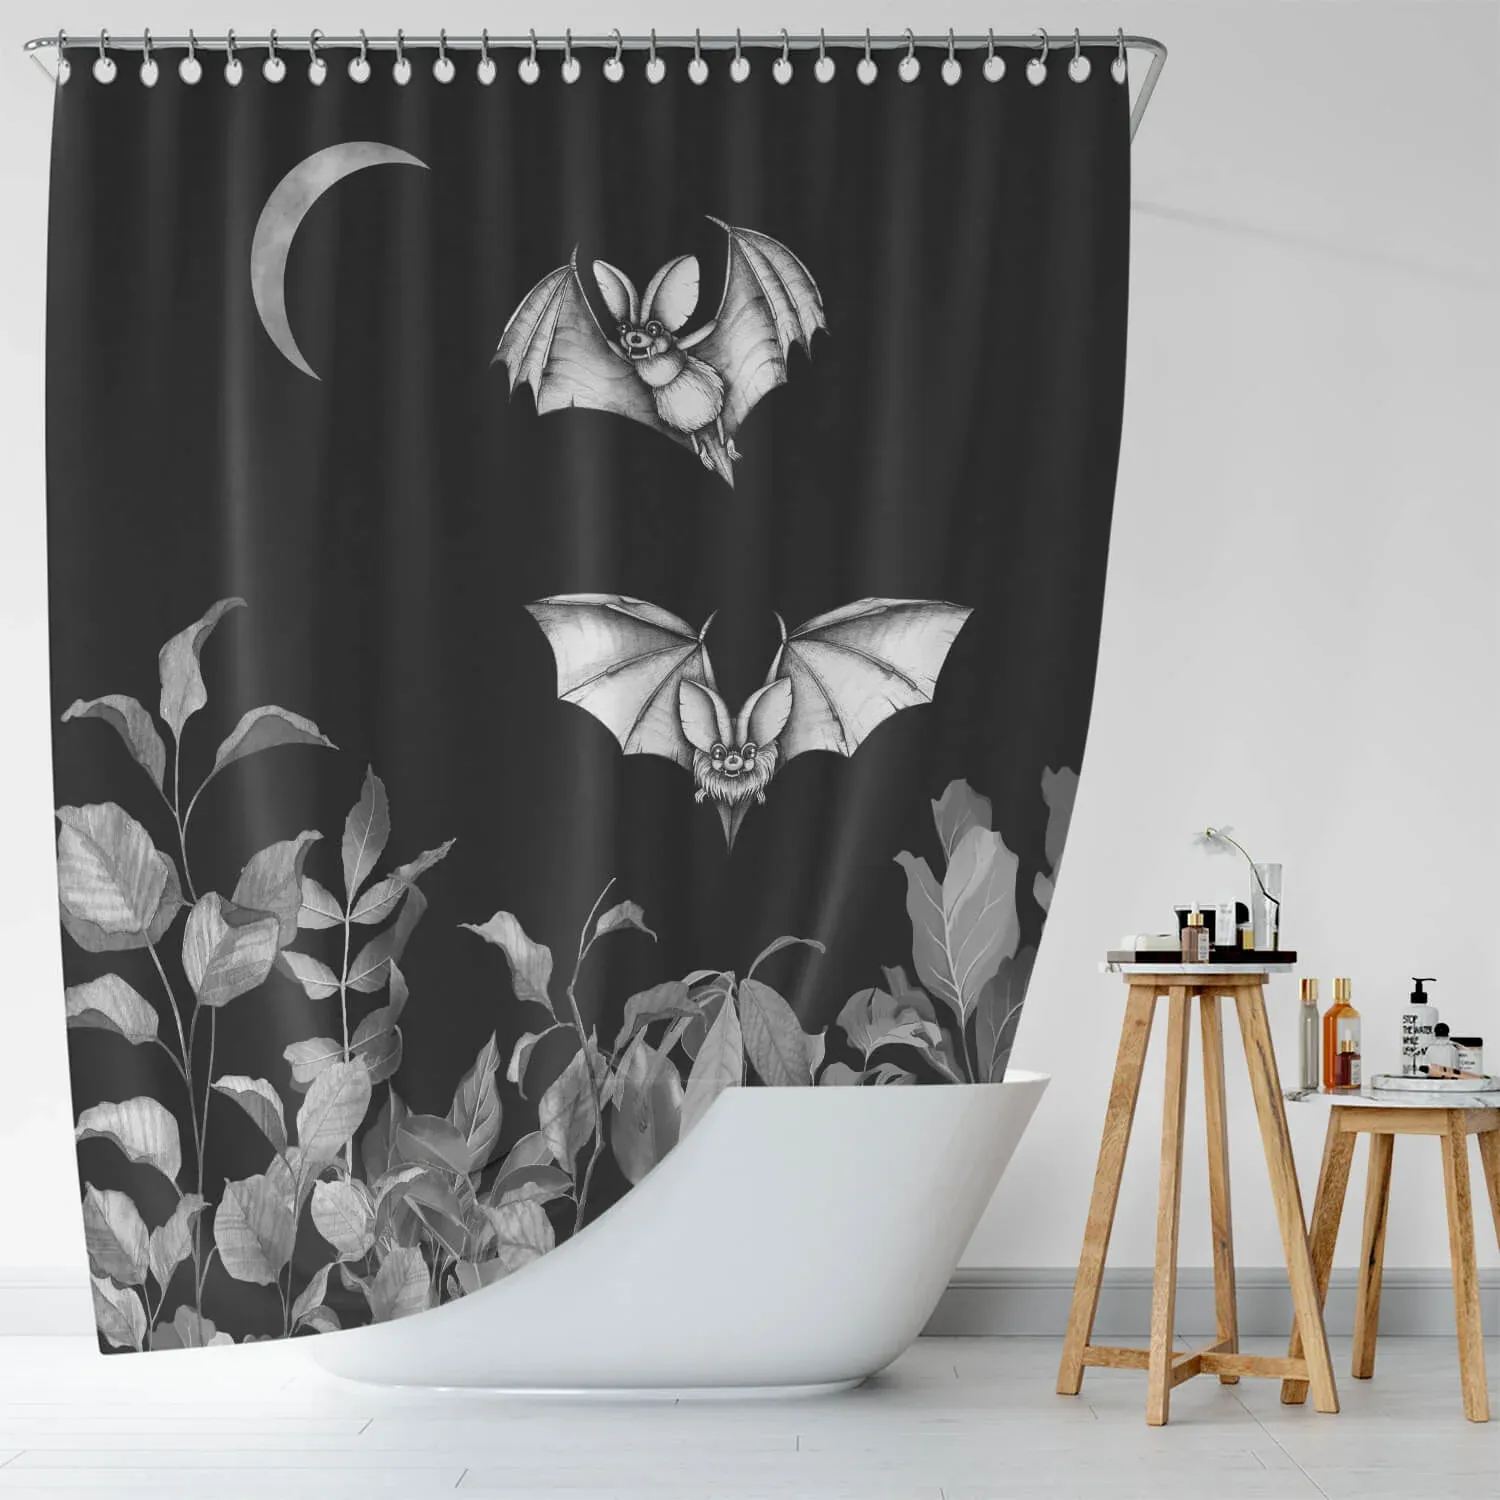 Unique Shower Curtains for Small Bathrooms: A black and white shower curtain with bats on it.